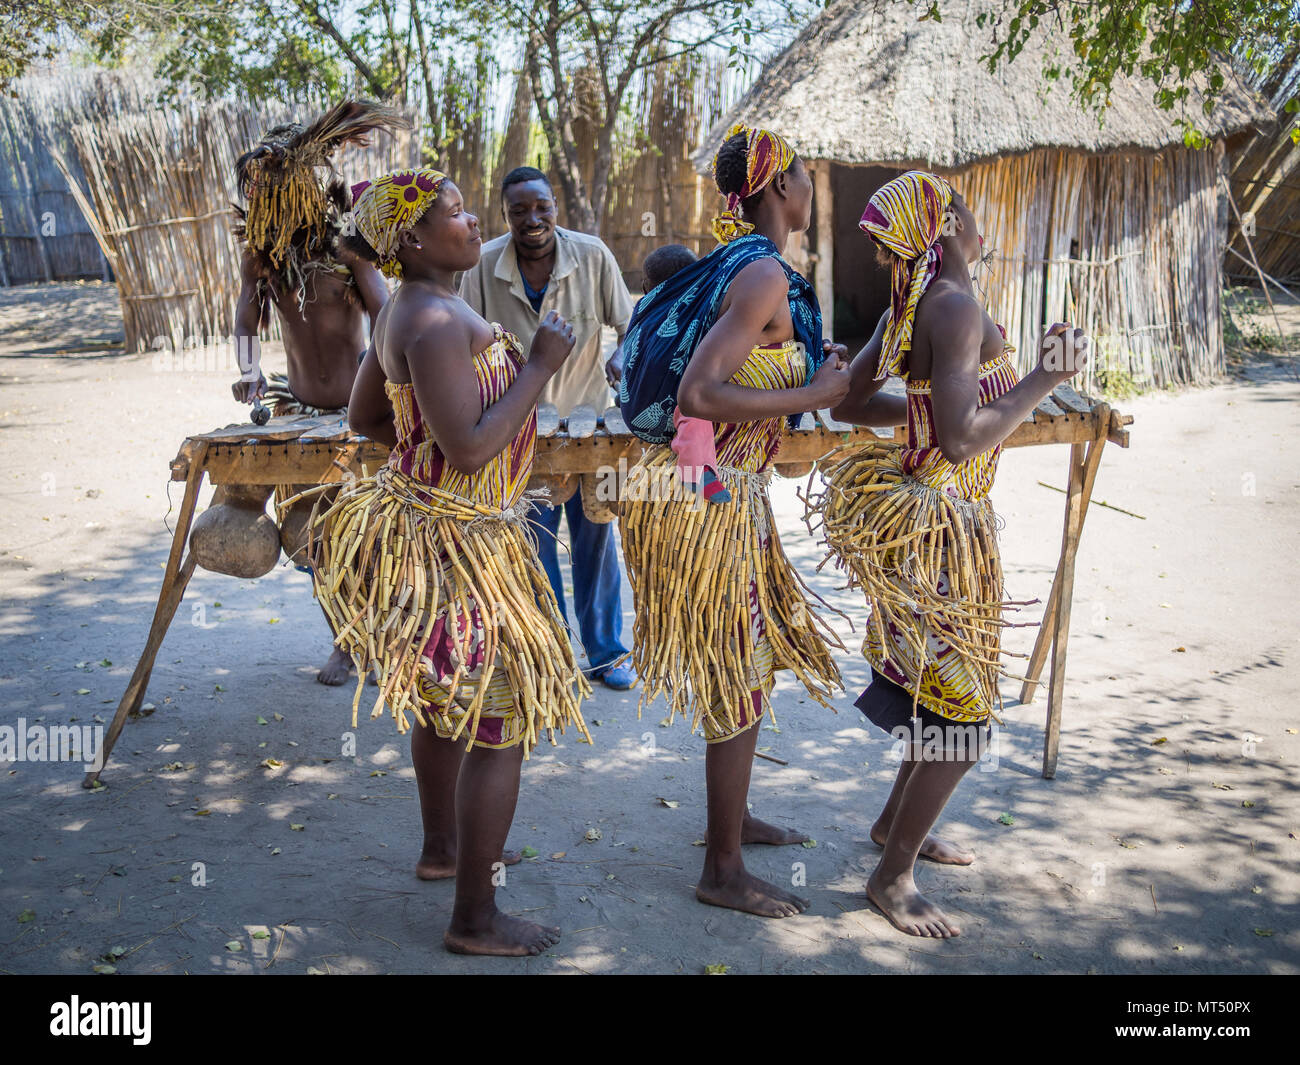 Luzibalule, Namibia - August 13, 2015: Traditionally dressed African women dancing to music, Lizauli Traditional Village Stock Photo